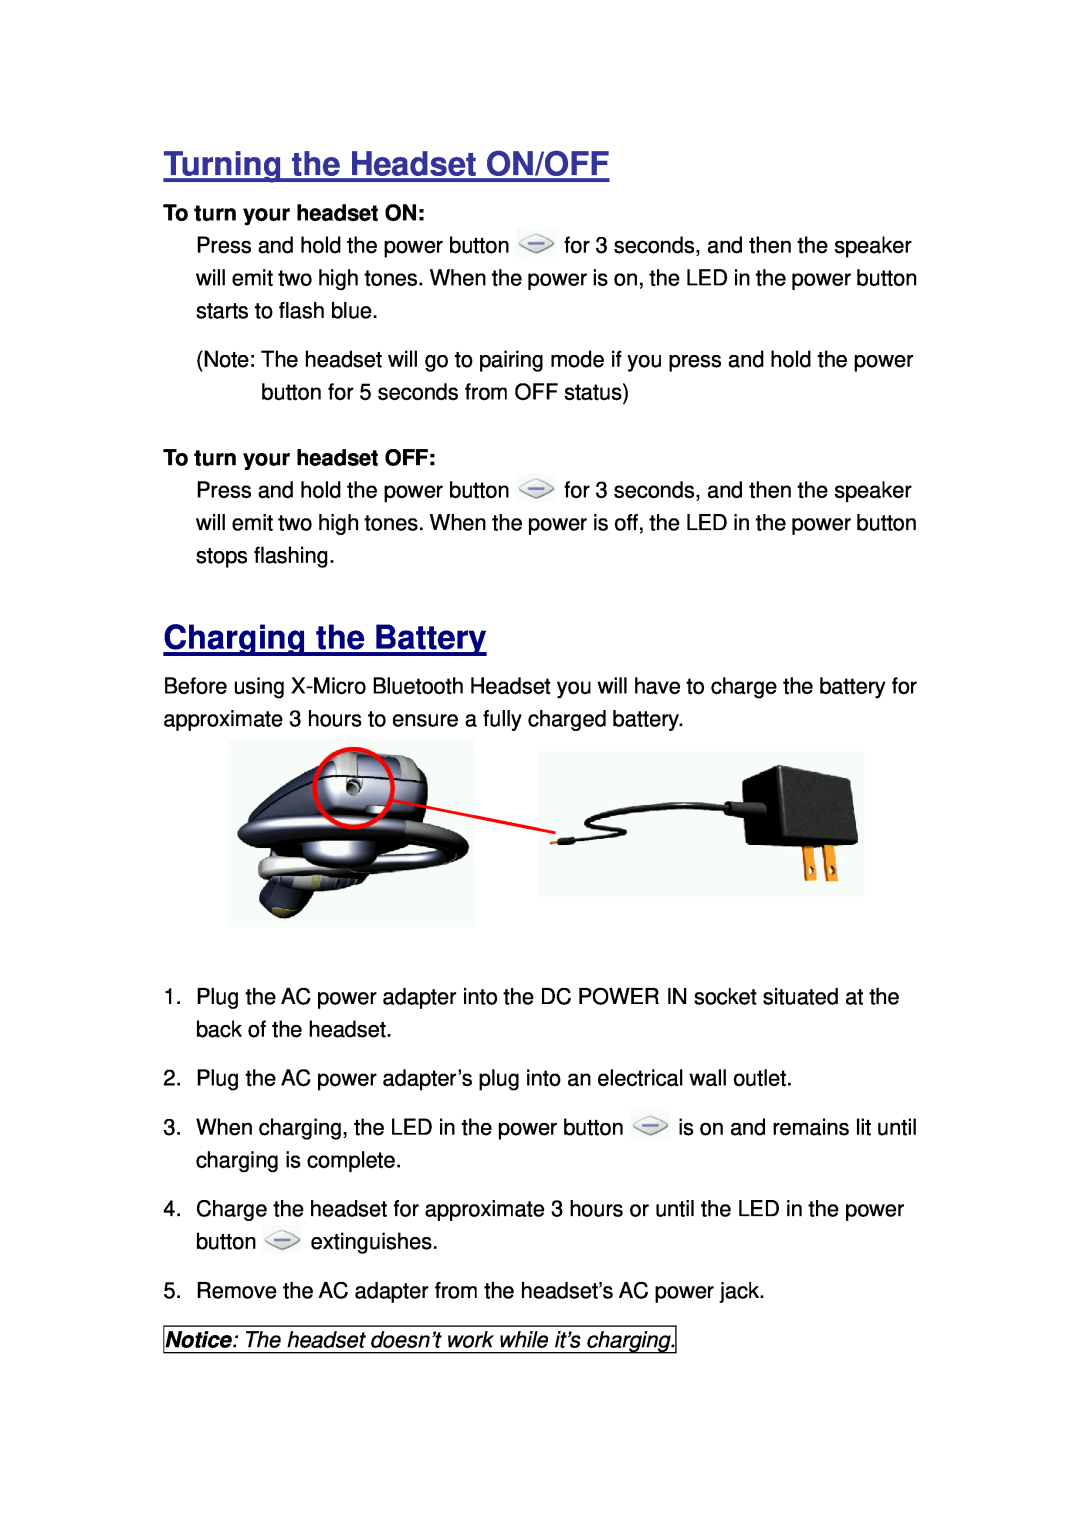 X-Micro Tech BT400GII user manual Turning the Headset ON/OFF, Charging the Battery 